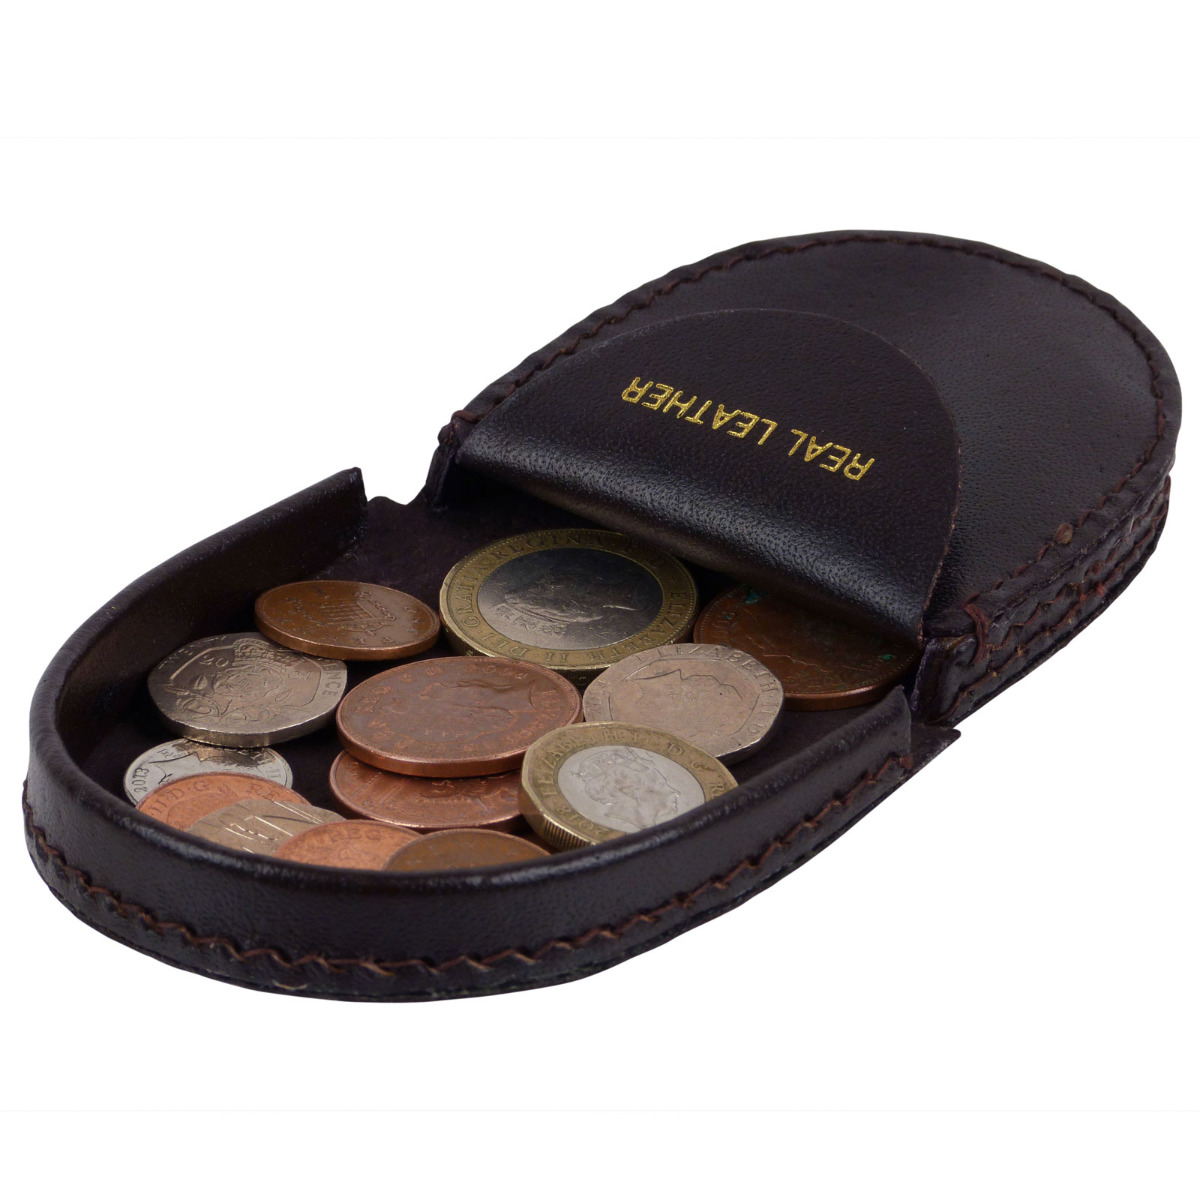 INJOYLIFE Genuine Leather Coin Purse Wallet Change Pouch Mini Tray Money Wallet for Mens Women Grey Coin Purse 